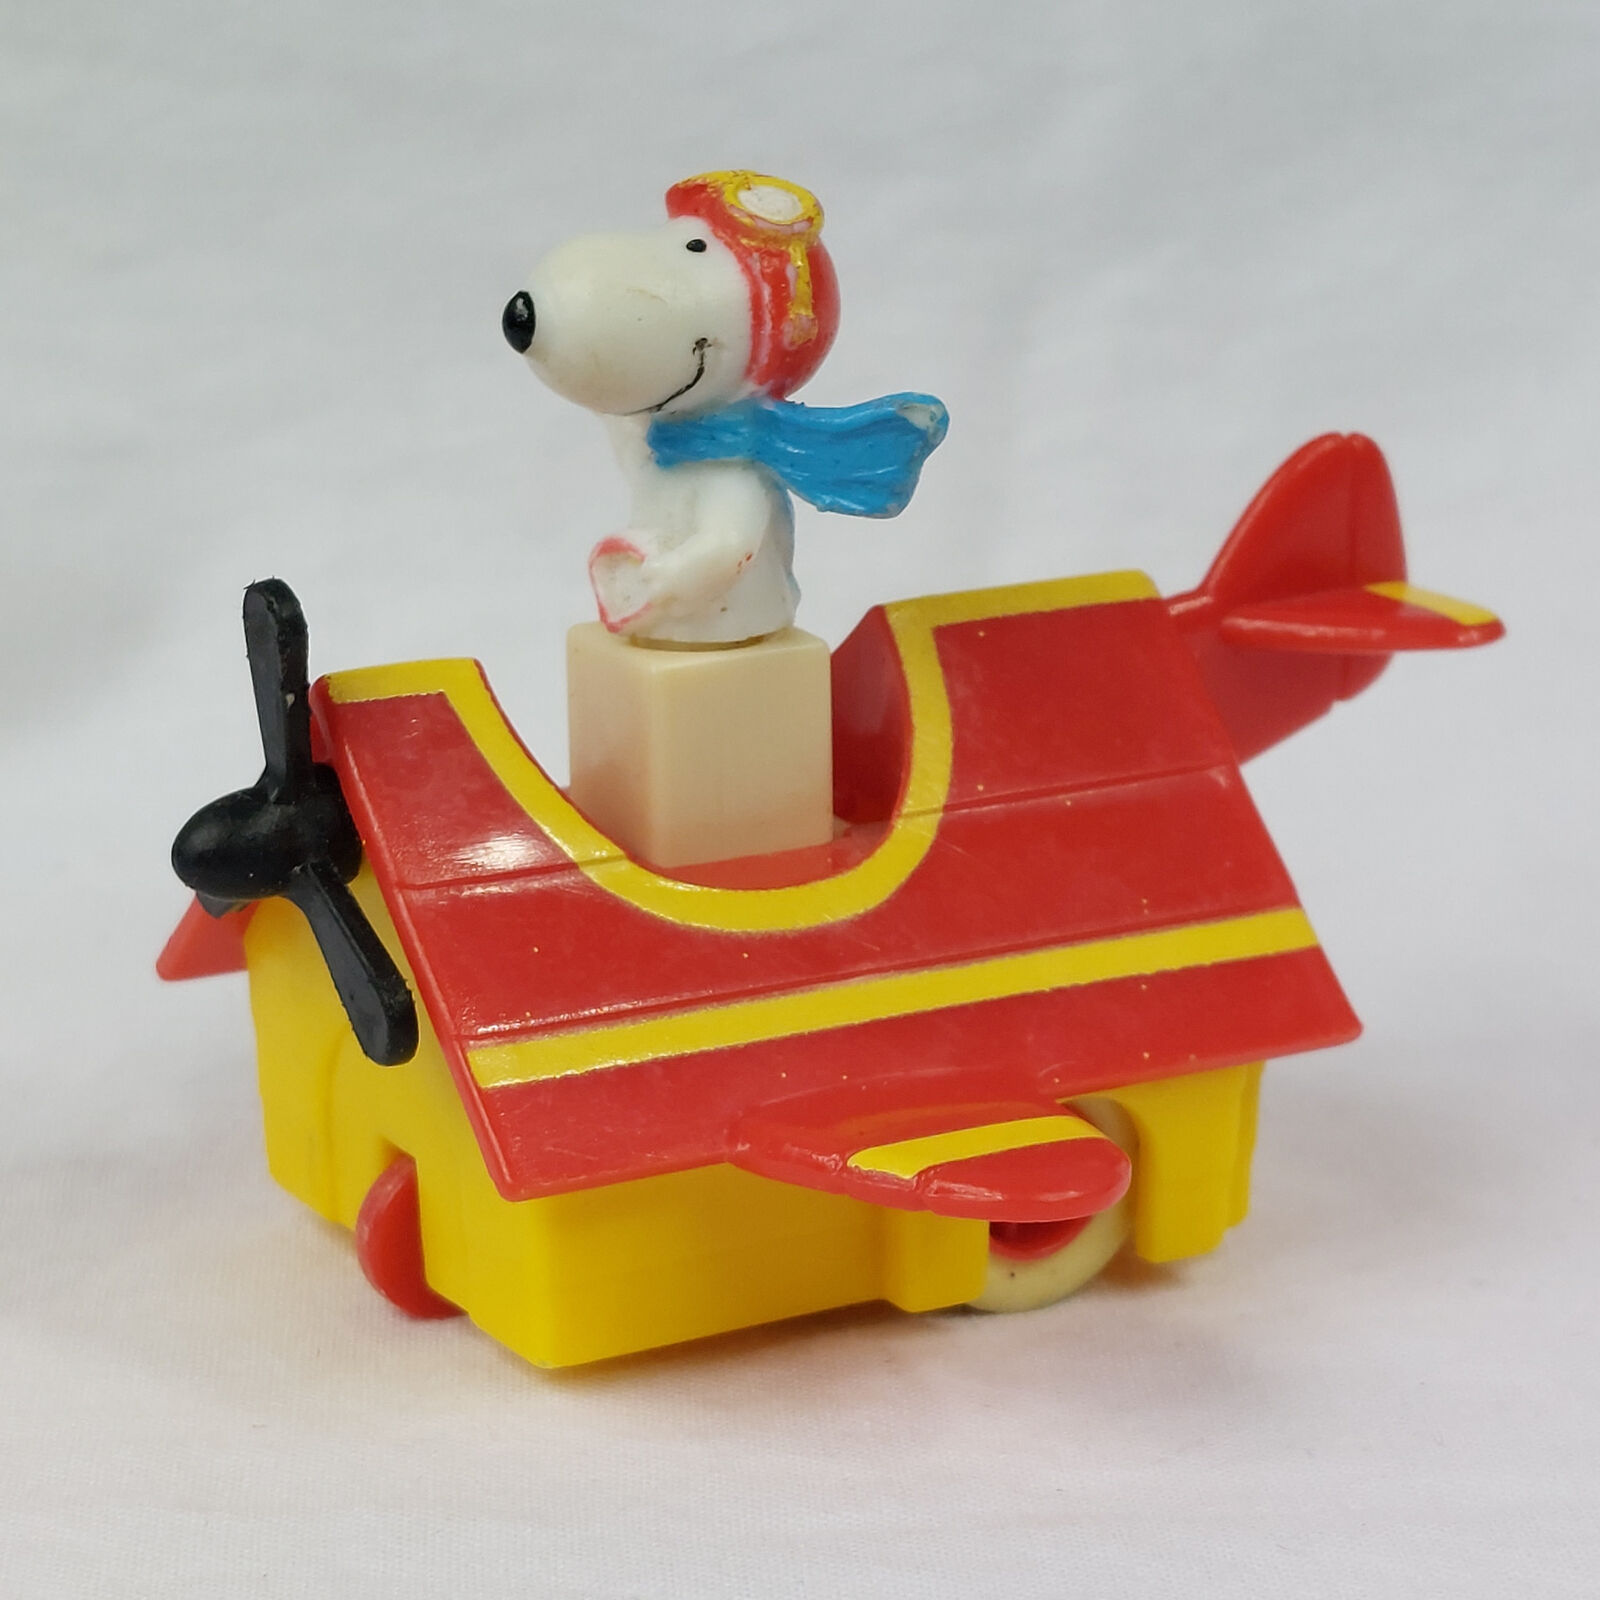 Vintage 1958 1966 Snoopy Pilot Red Baron Doghouse Plane Peanuts Rare Toy Car